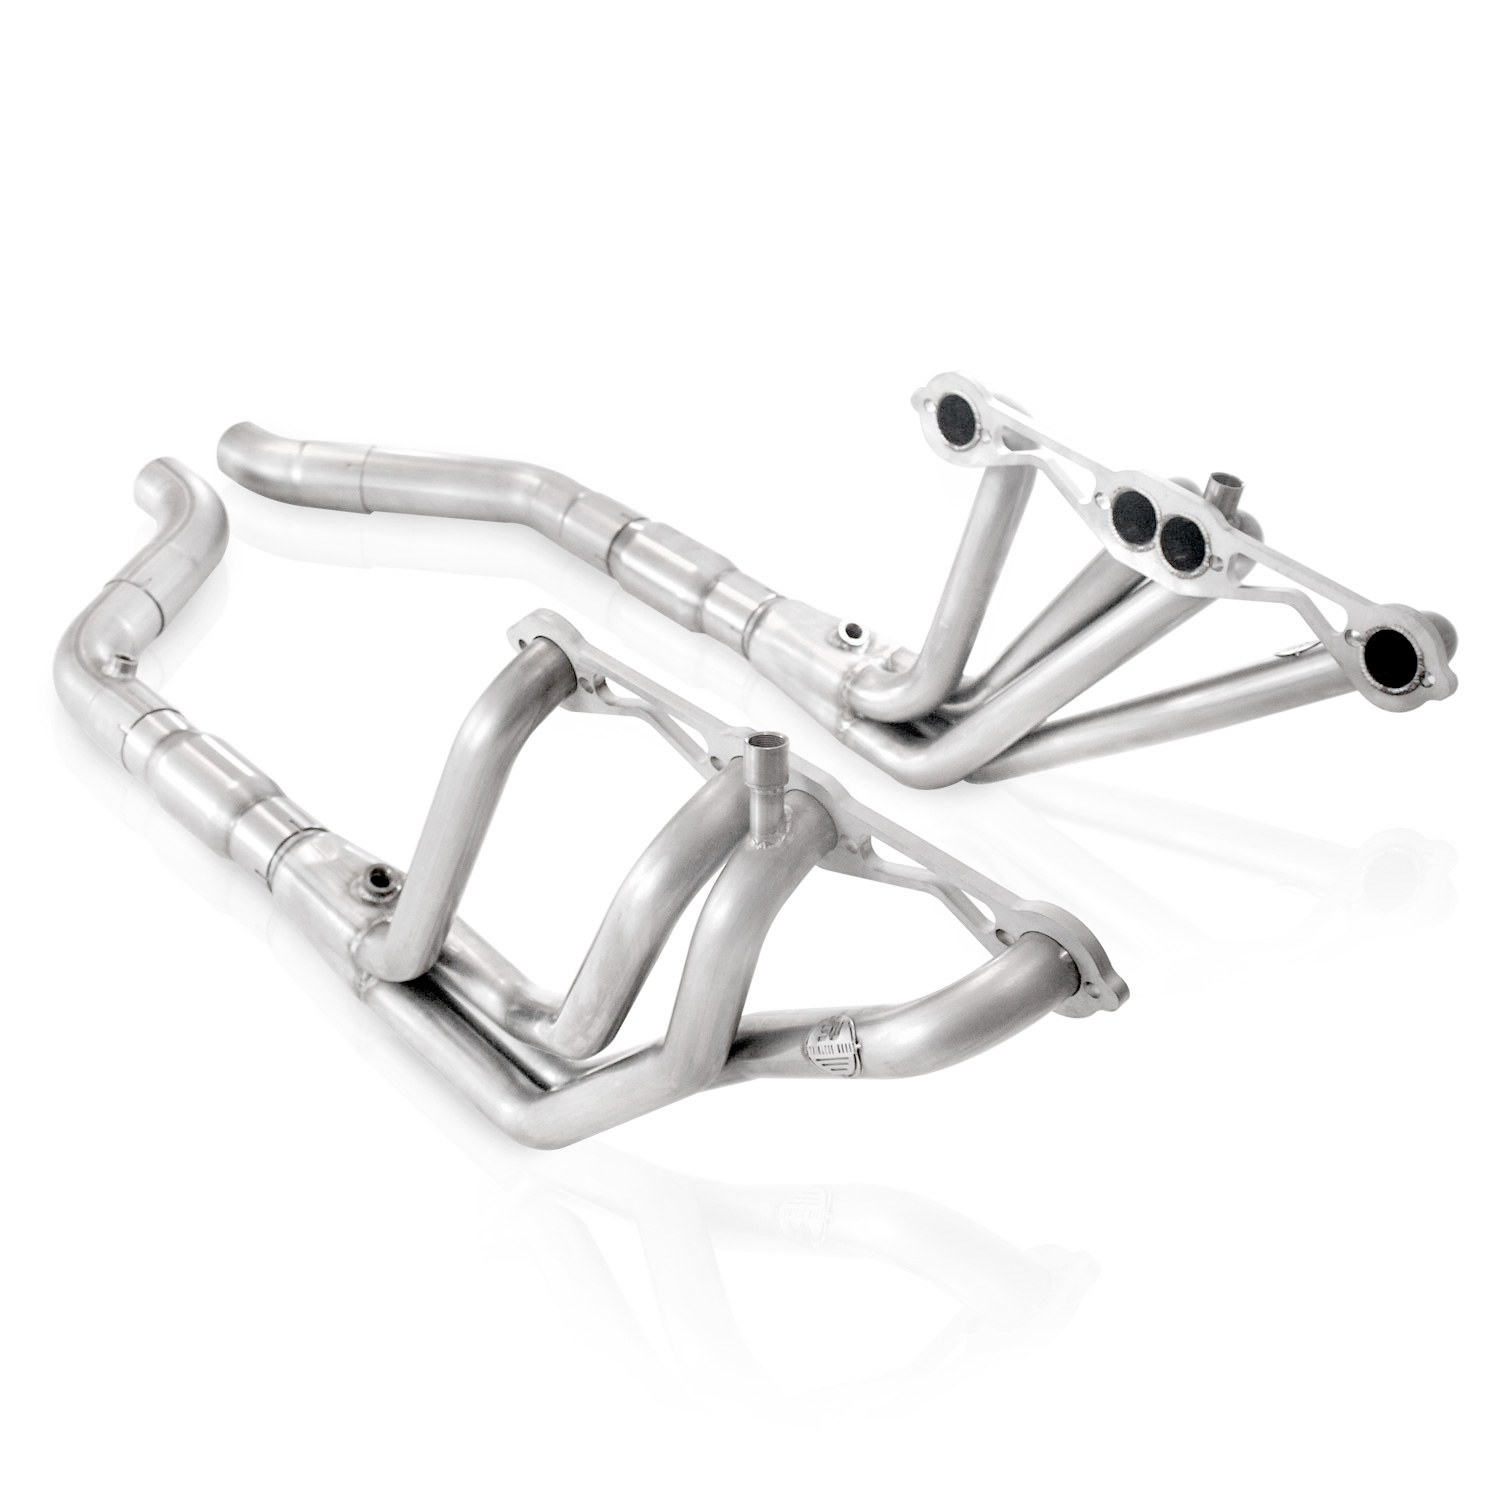 1992-1996 Corvette C4 5.7L SW Headers 1-5/8" With Catted Leads Factory Connect